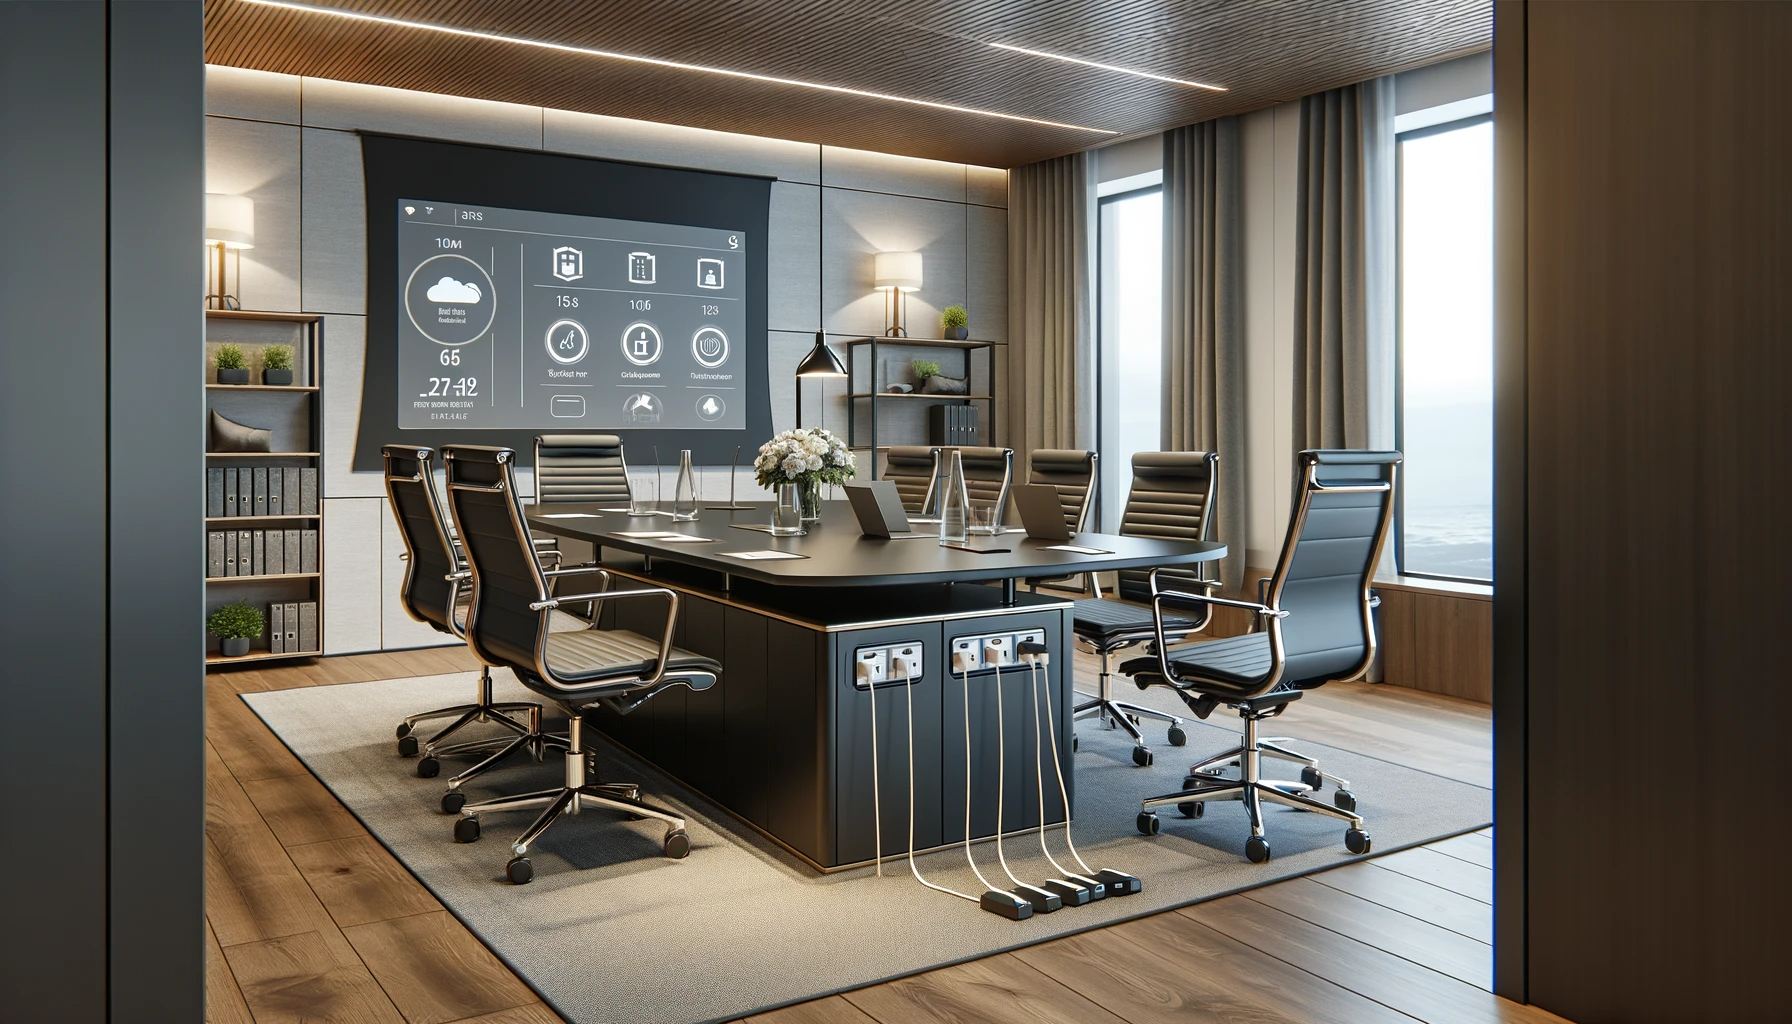 DALL·E 2023-12-19 14.54.51 - A small conference room in an office, featuring a compact conference table equipped with charging ports. The table is ideal for smaller group meetings